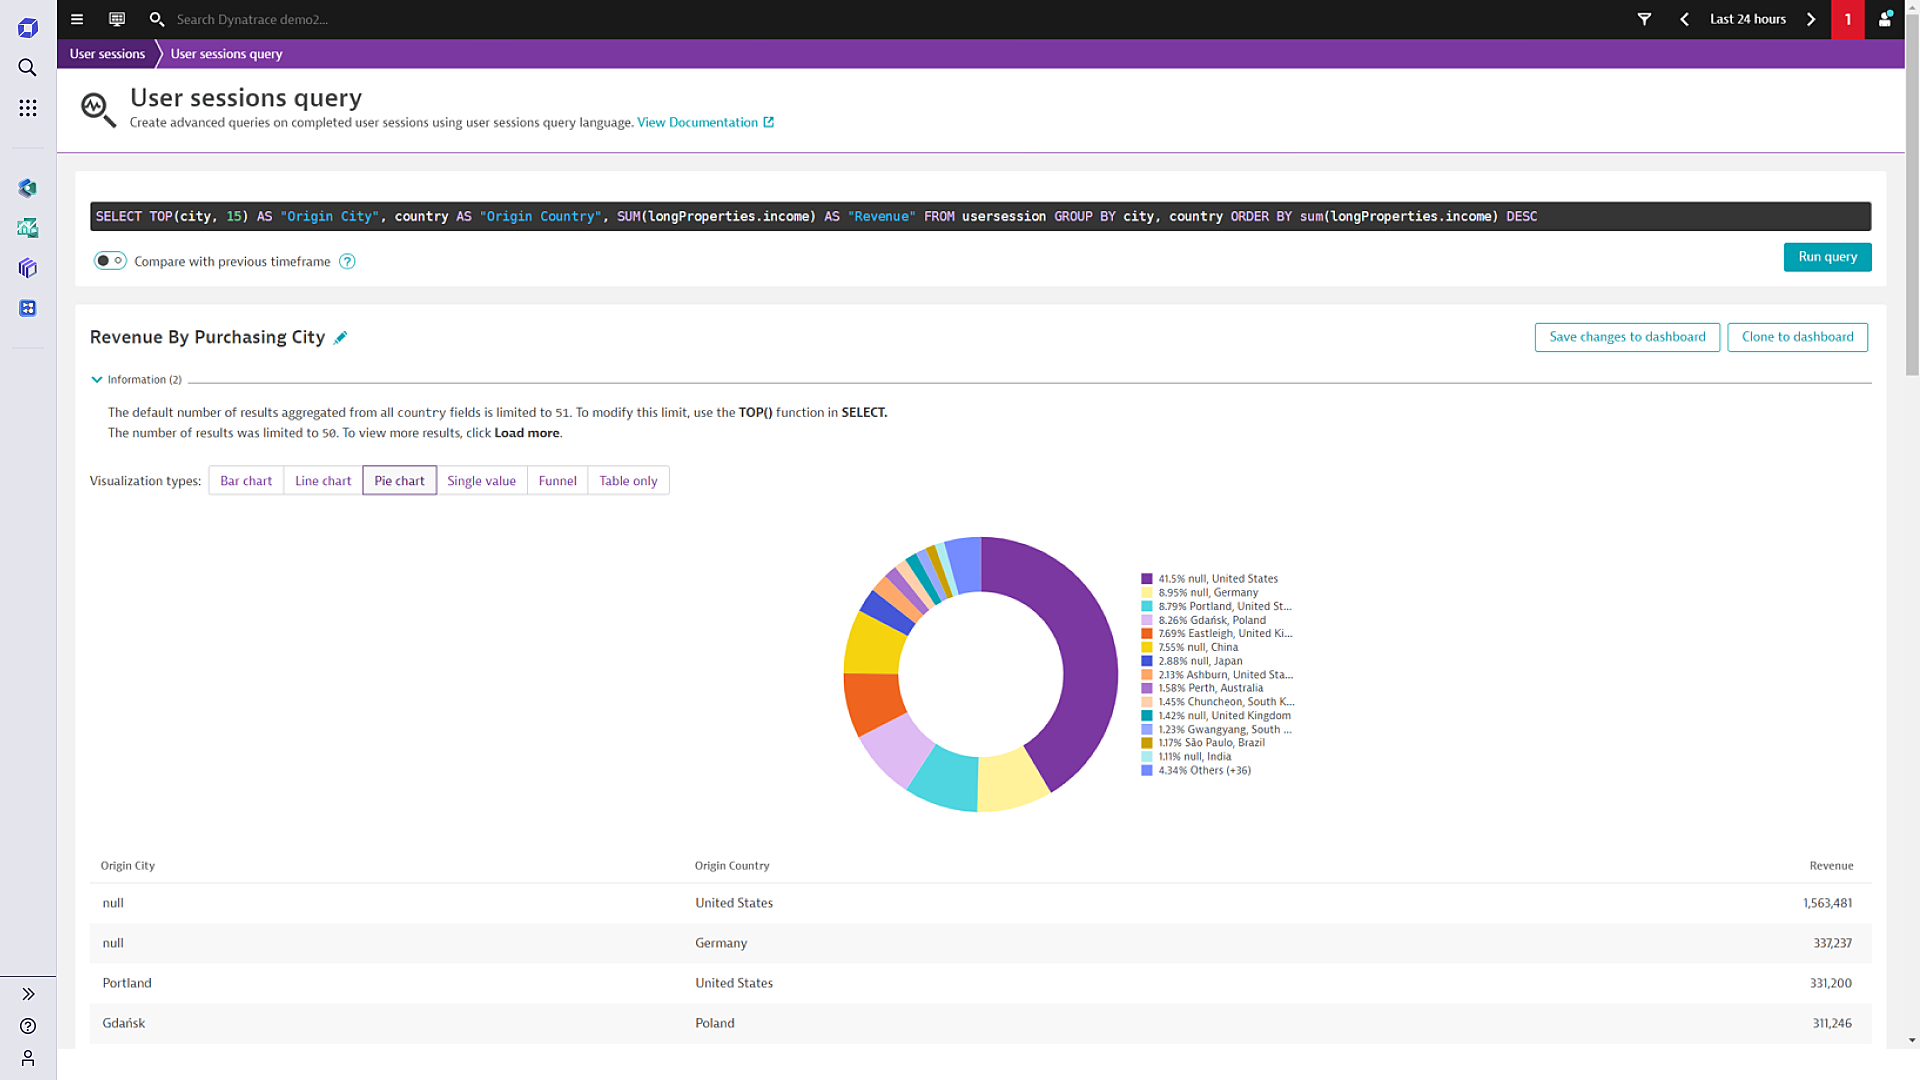 User session query overview in Dynatrace screenshot